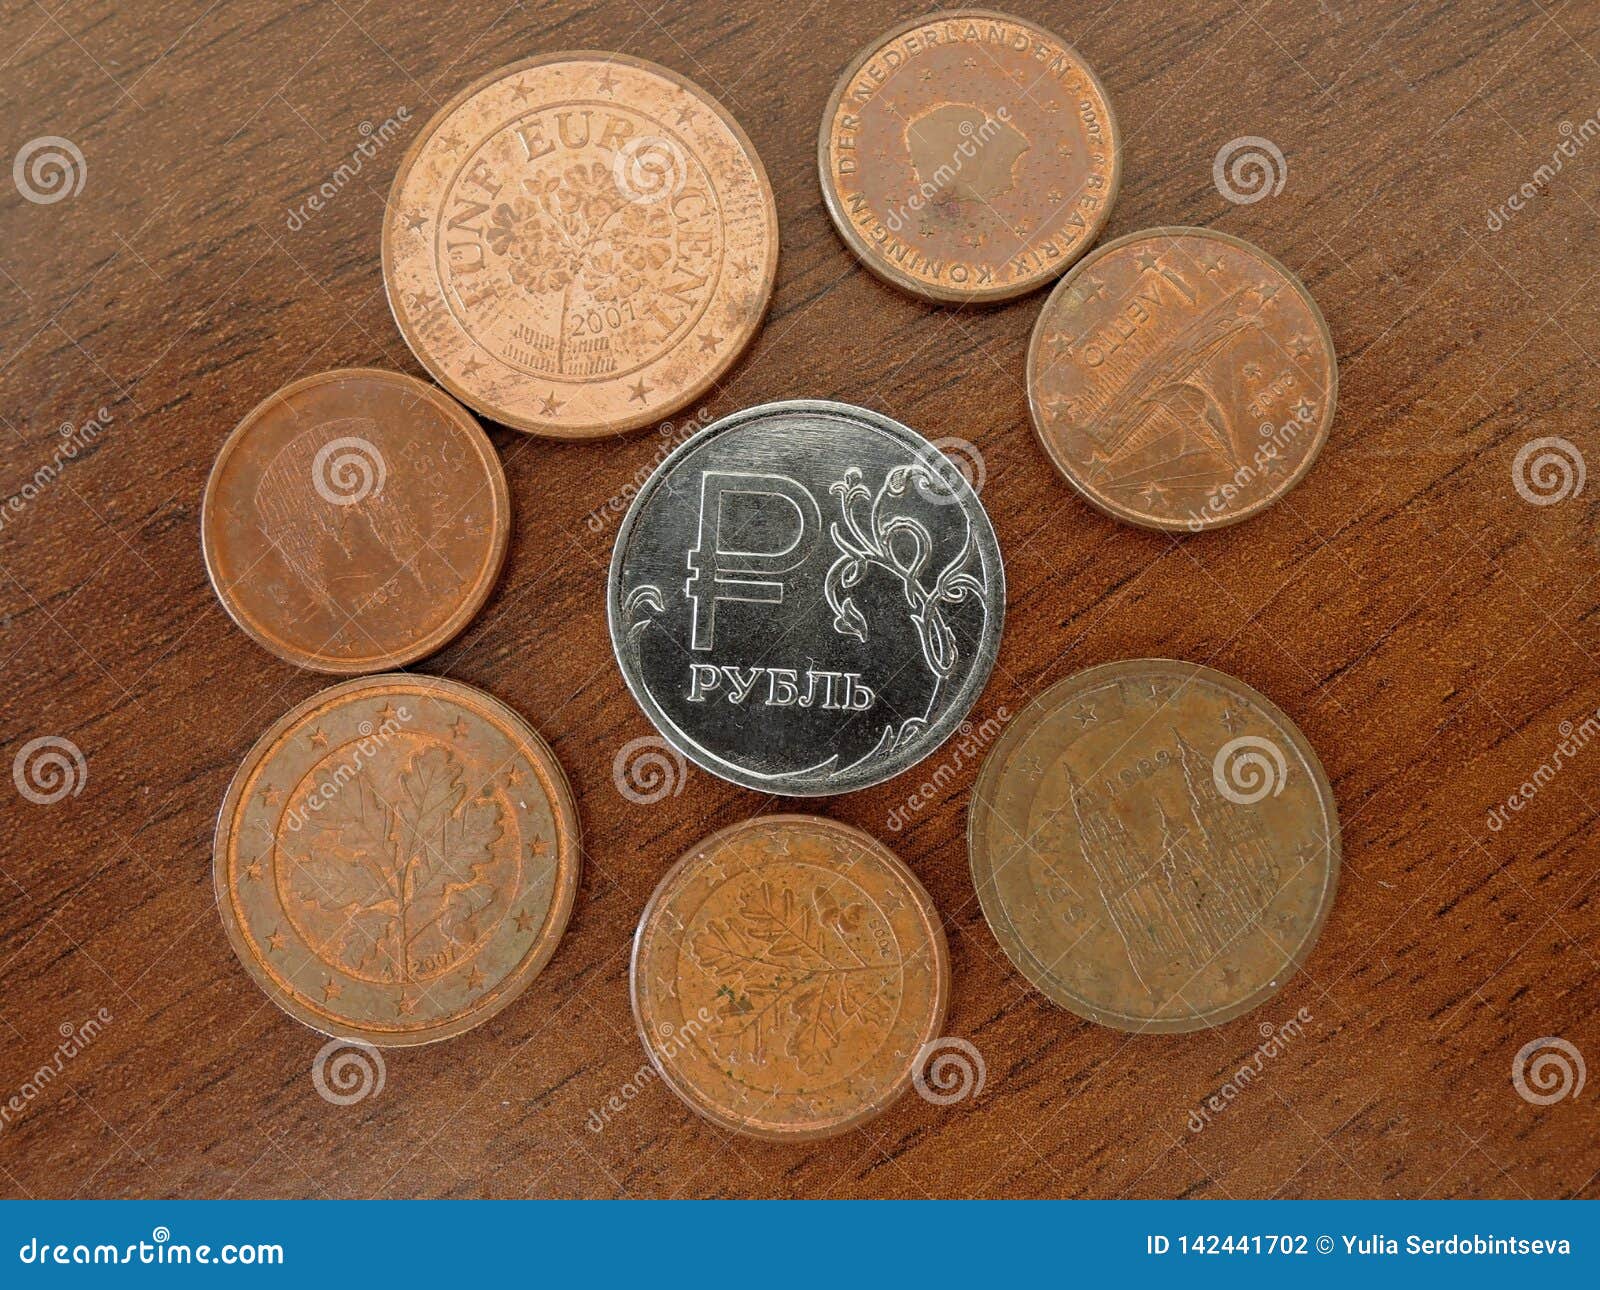 The Ruble Coin Is Surrounded By Euro Coins On A Brown ...